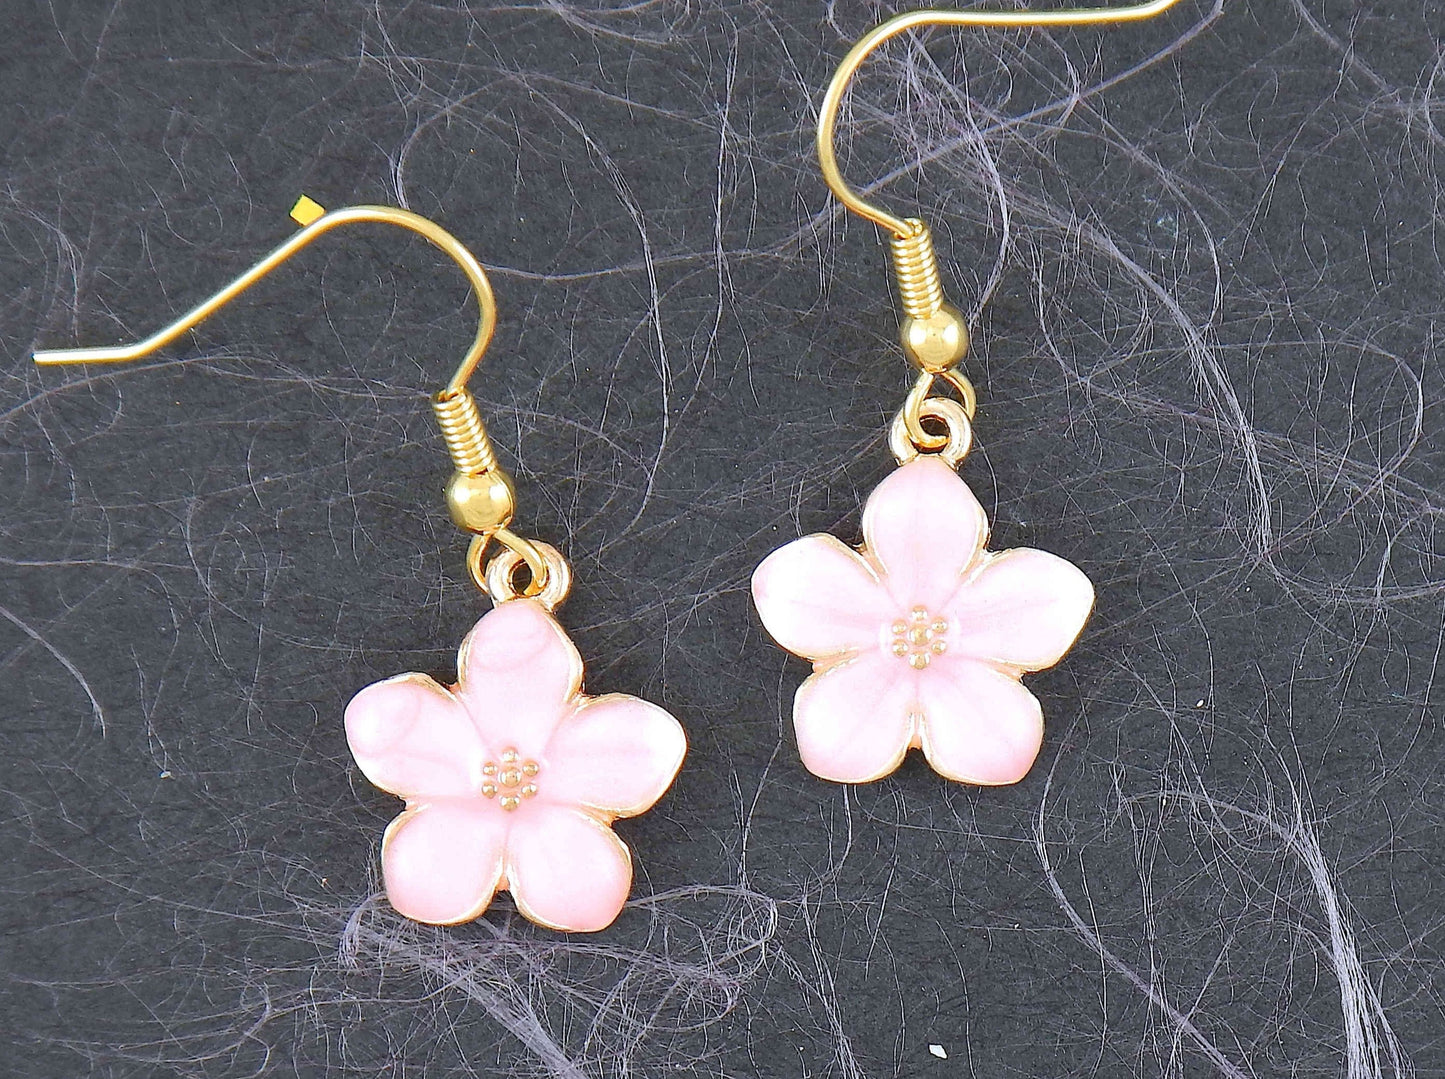 Short earrings with enamelled cherry blossoms (sakura) in 4 pastel colours (white, lilac, pink, blue), gold-toned stainless steel hooks